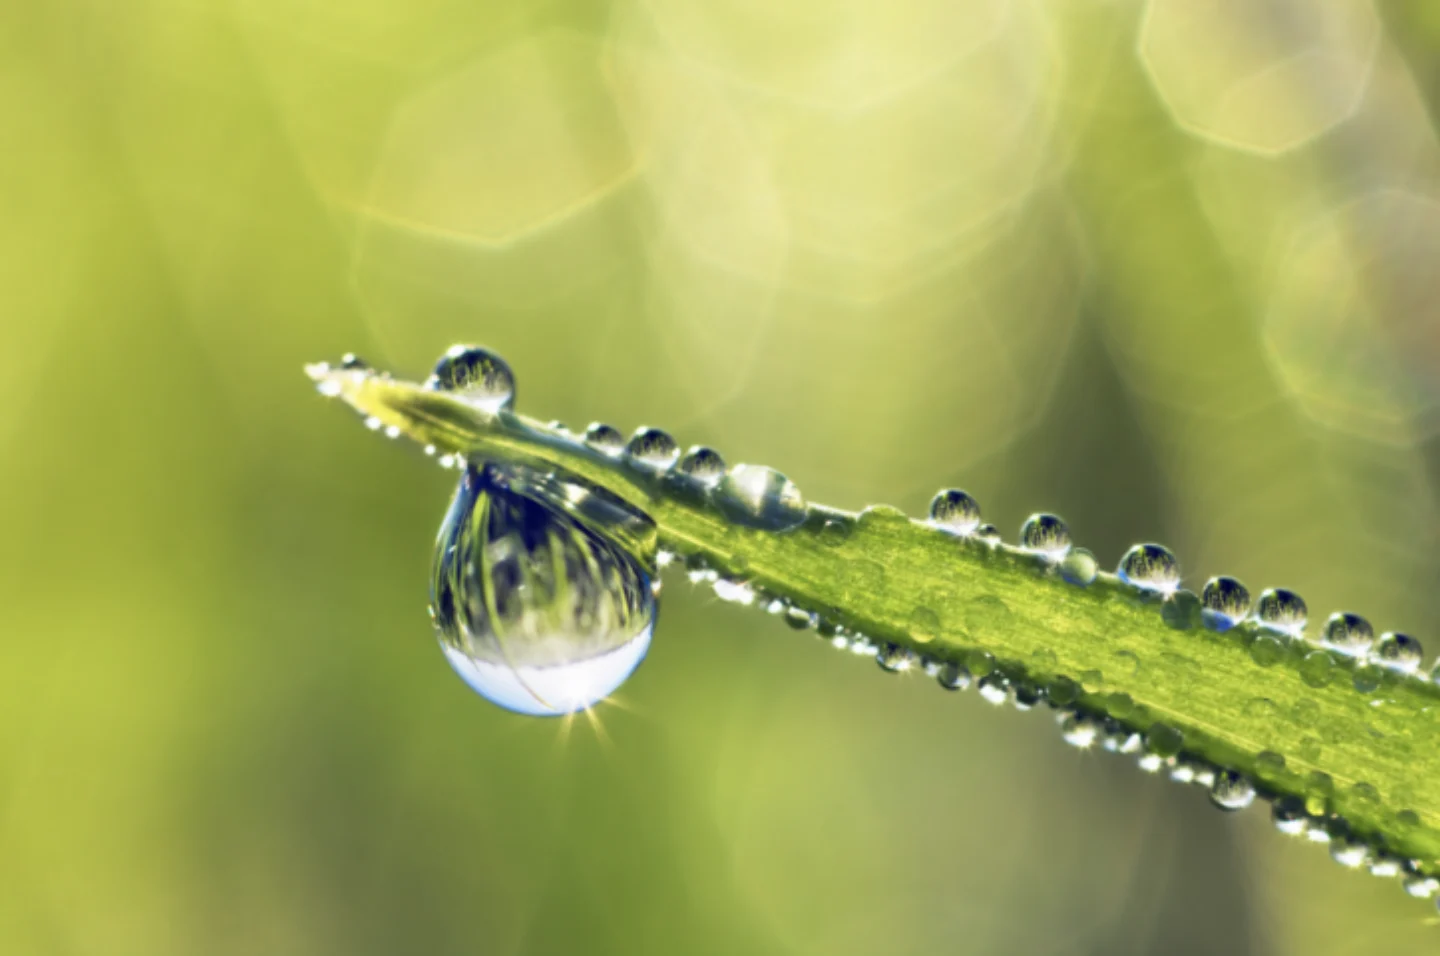 Getty Images: Raindrop on leaf, grass